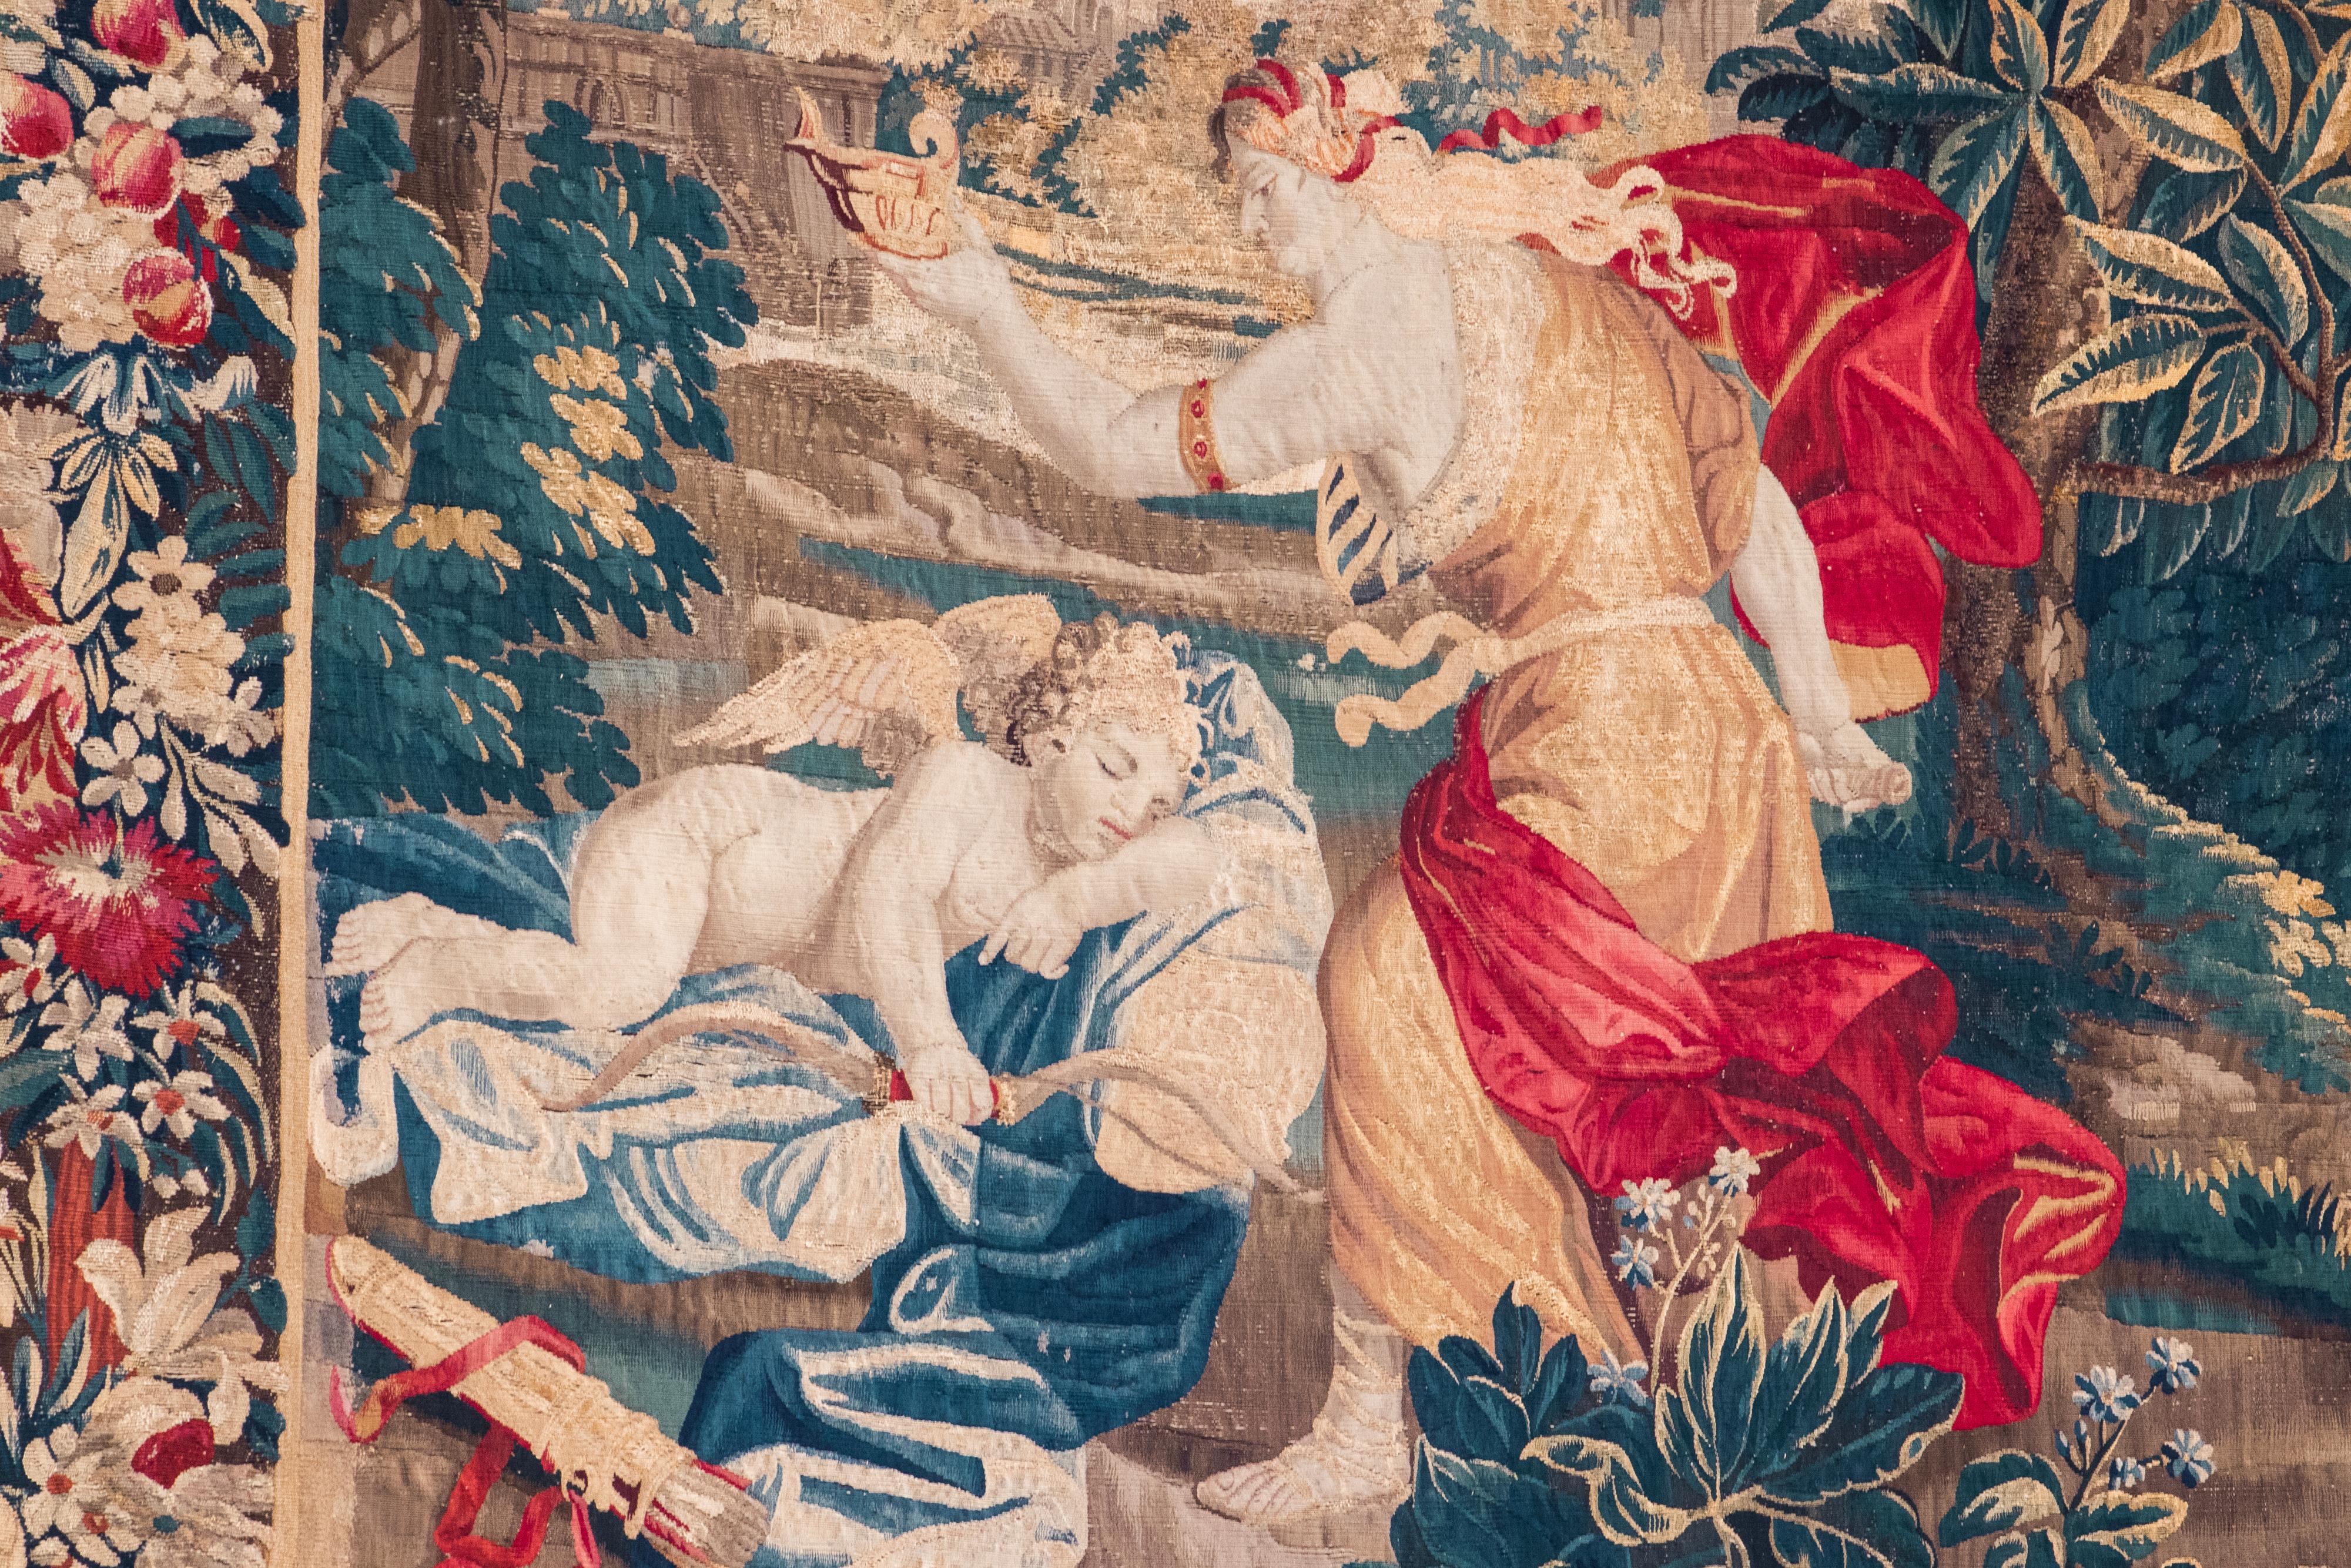 Spectacular Flemish Verdure tapestry depicting Pysche and the Sleeping Cupid in a flourishing garden, with an architectural landscape on the background. The composition is framed with a wide rim, decorated with traditional scroll motifs, florals,